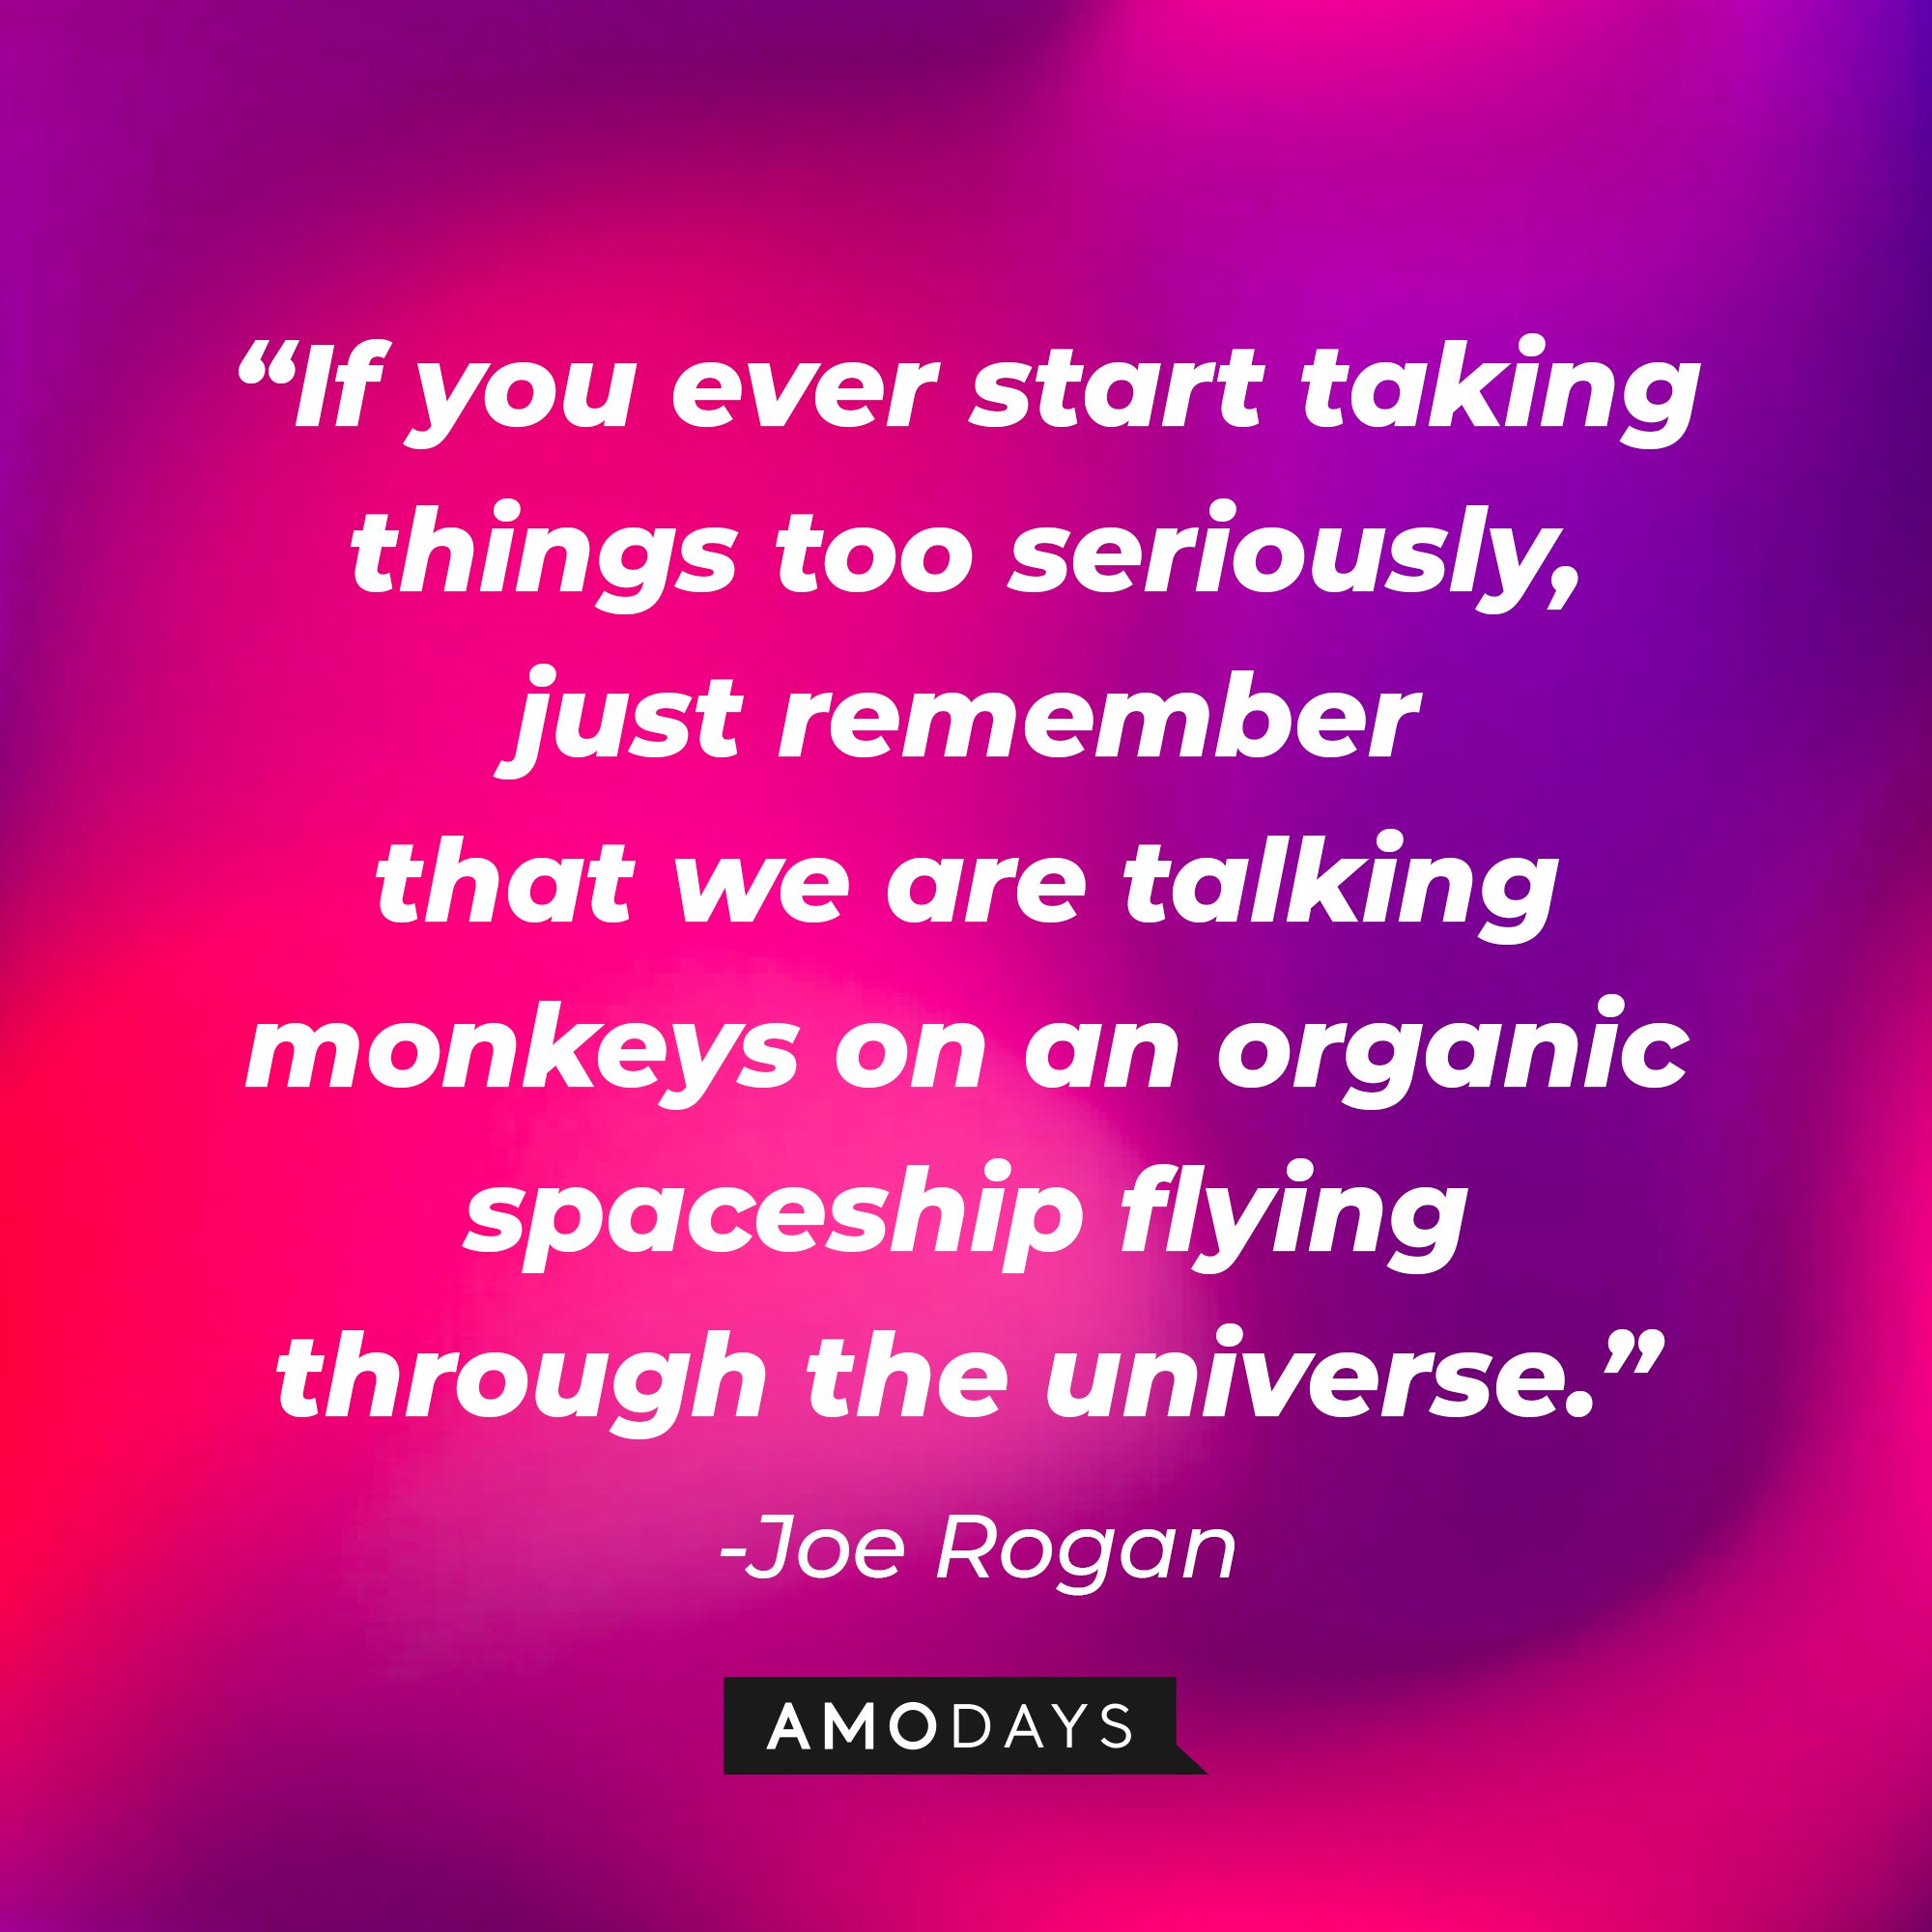  Joe Rogan's quote: "If you ever start taking things too seriously, just remember that we are talking monkeys on an organic spaceship flying through the universe." | Image: AmoDays